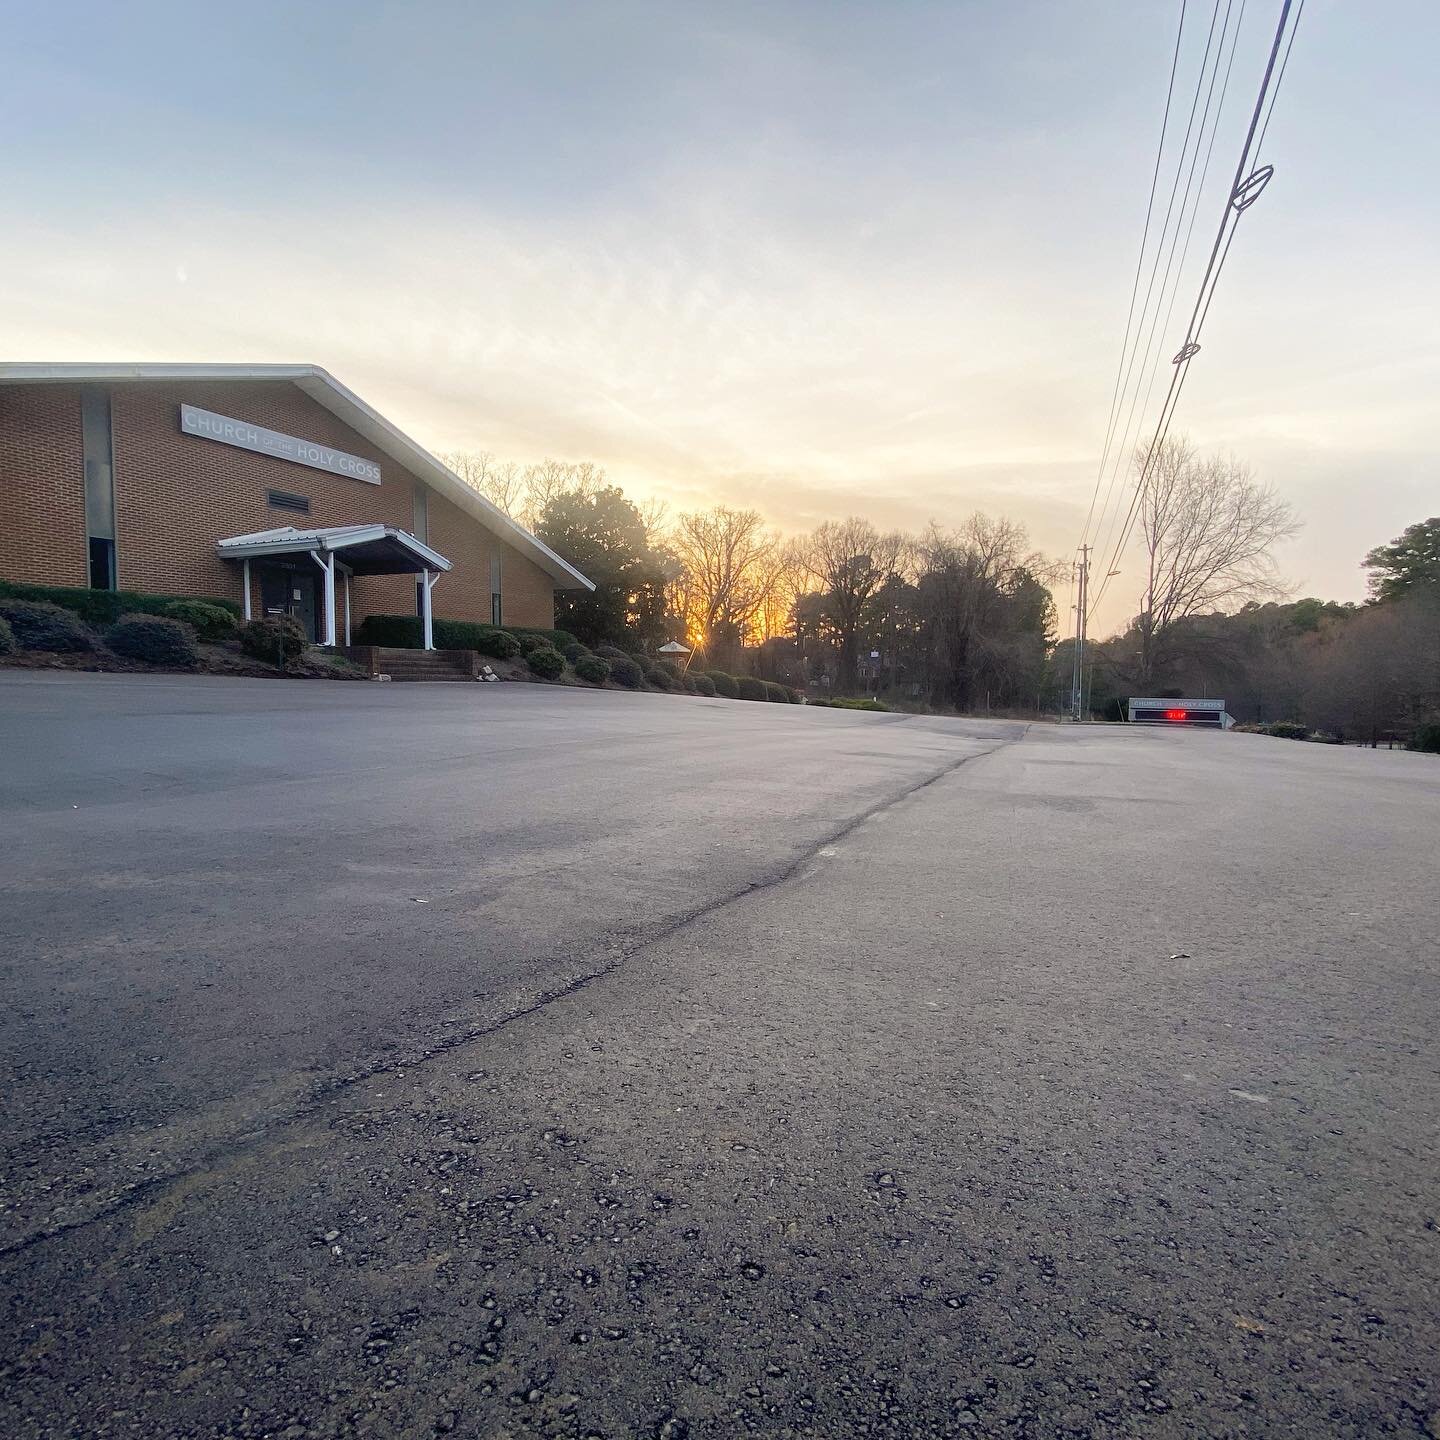 Come see our new parking lot tomorrow! 10am worship and an updated lot for you and visitors 😎 #comeasyouare #raleigh #nc #anglicanforanyone #sunday